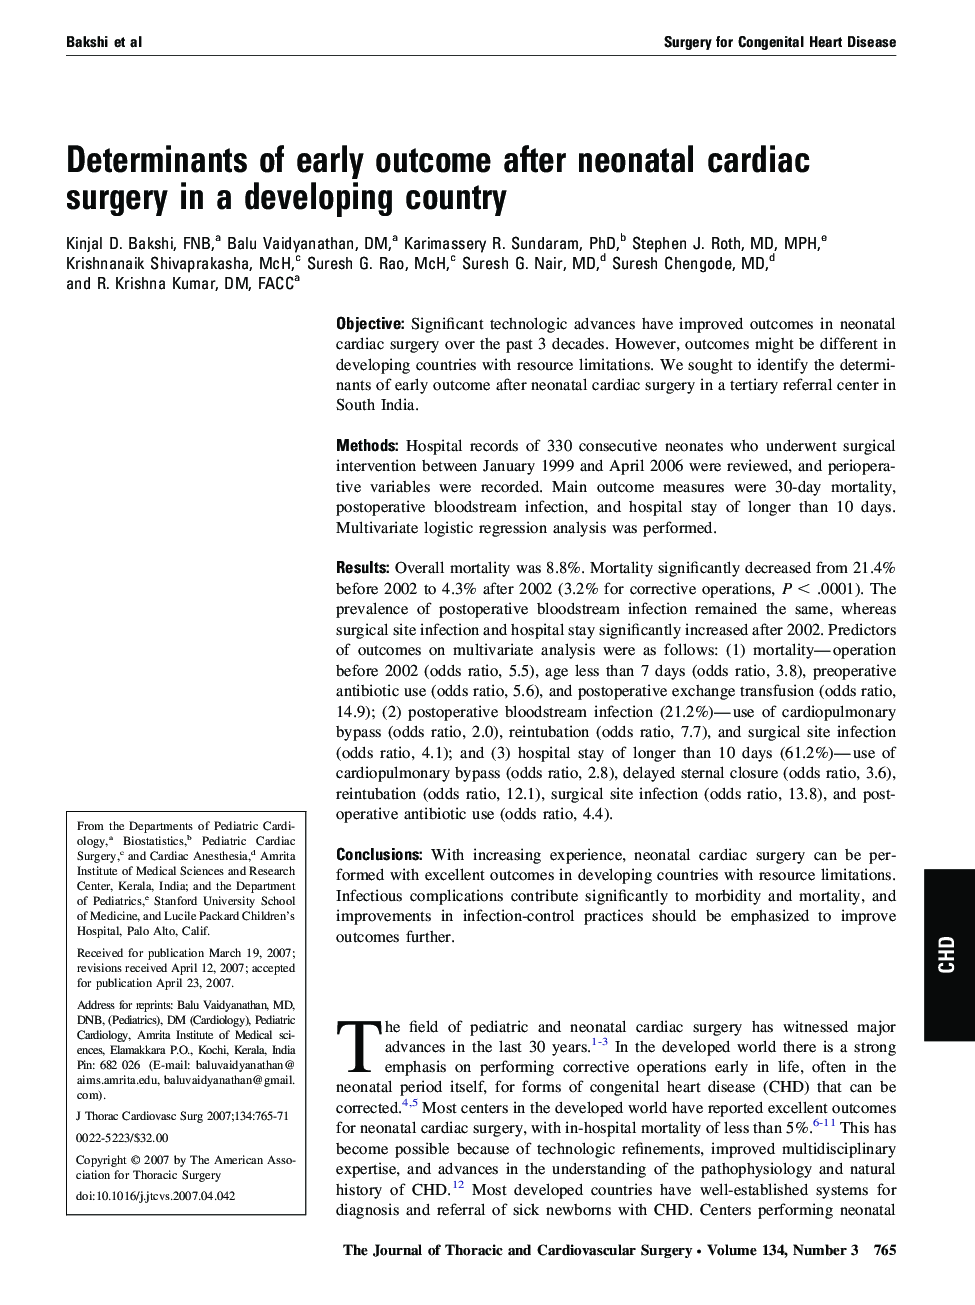 Determinants of early outcome after neonatal cardiac surgery in a developing country